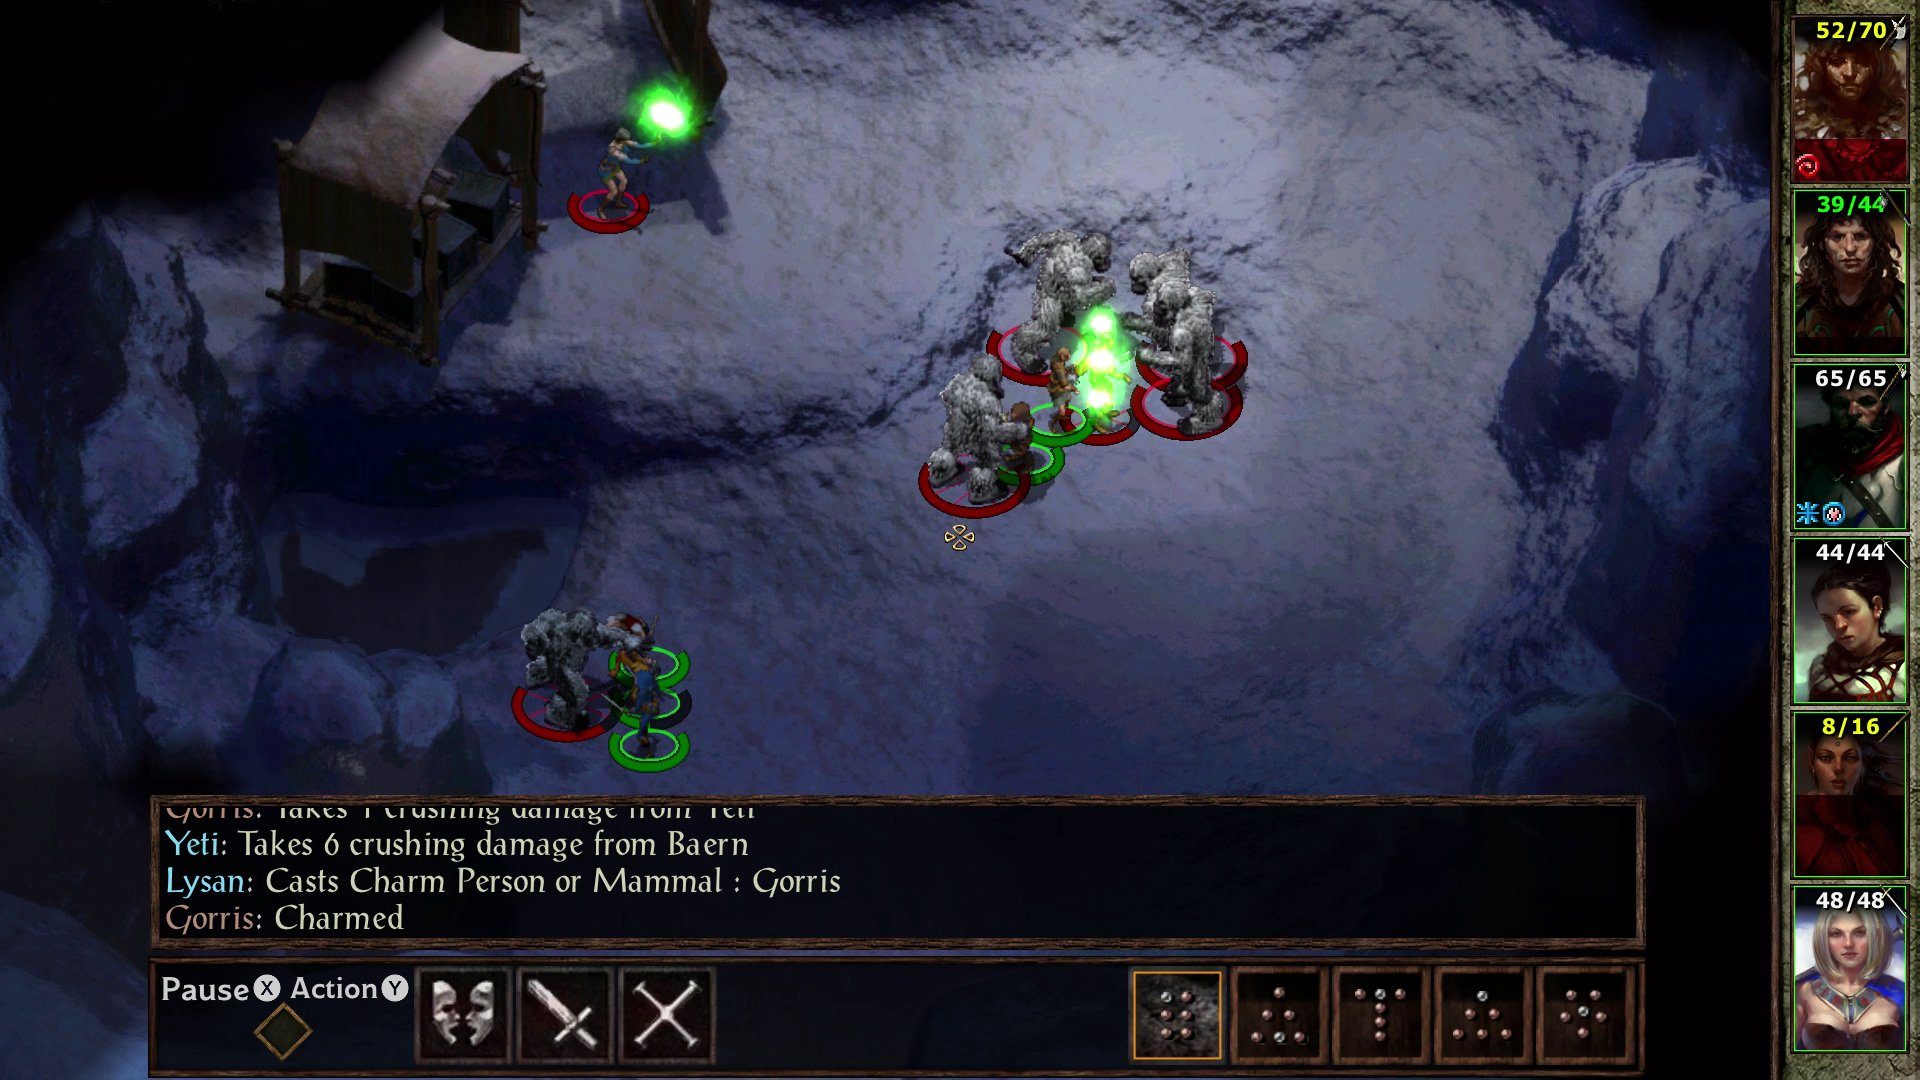 & One Xbox Icewind Planescape: Torment